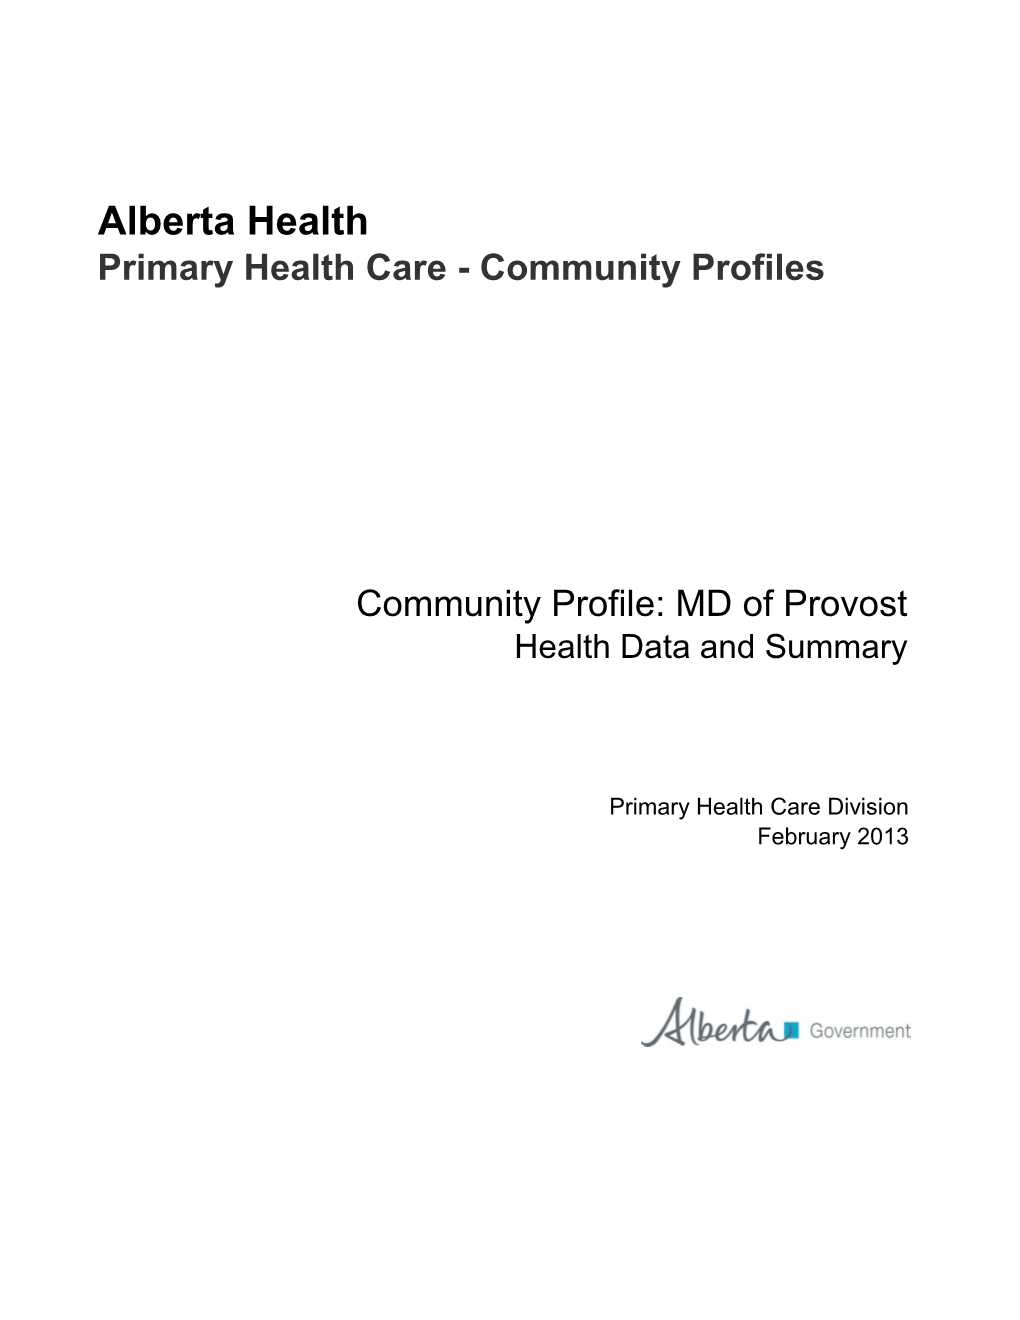 MD of Provost Health Data and Summary